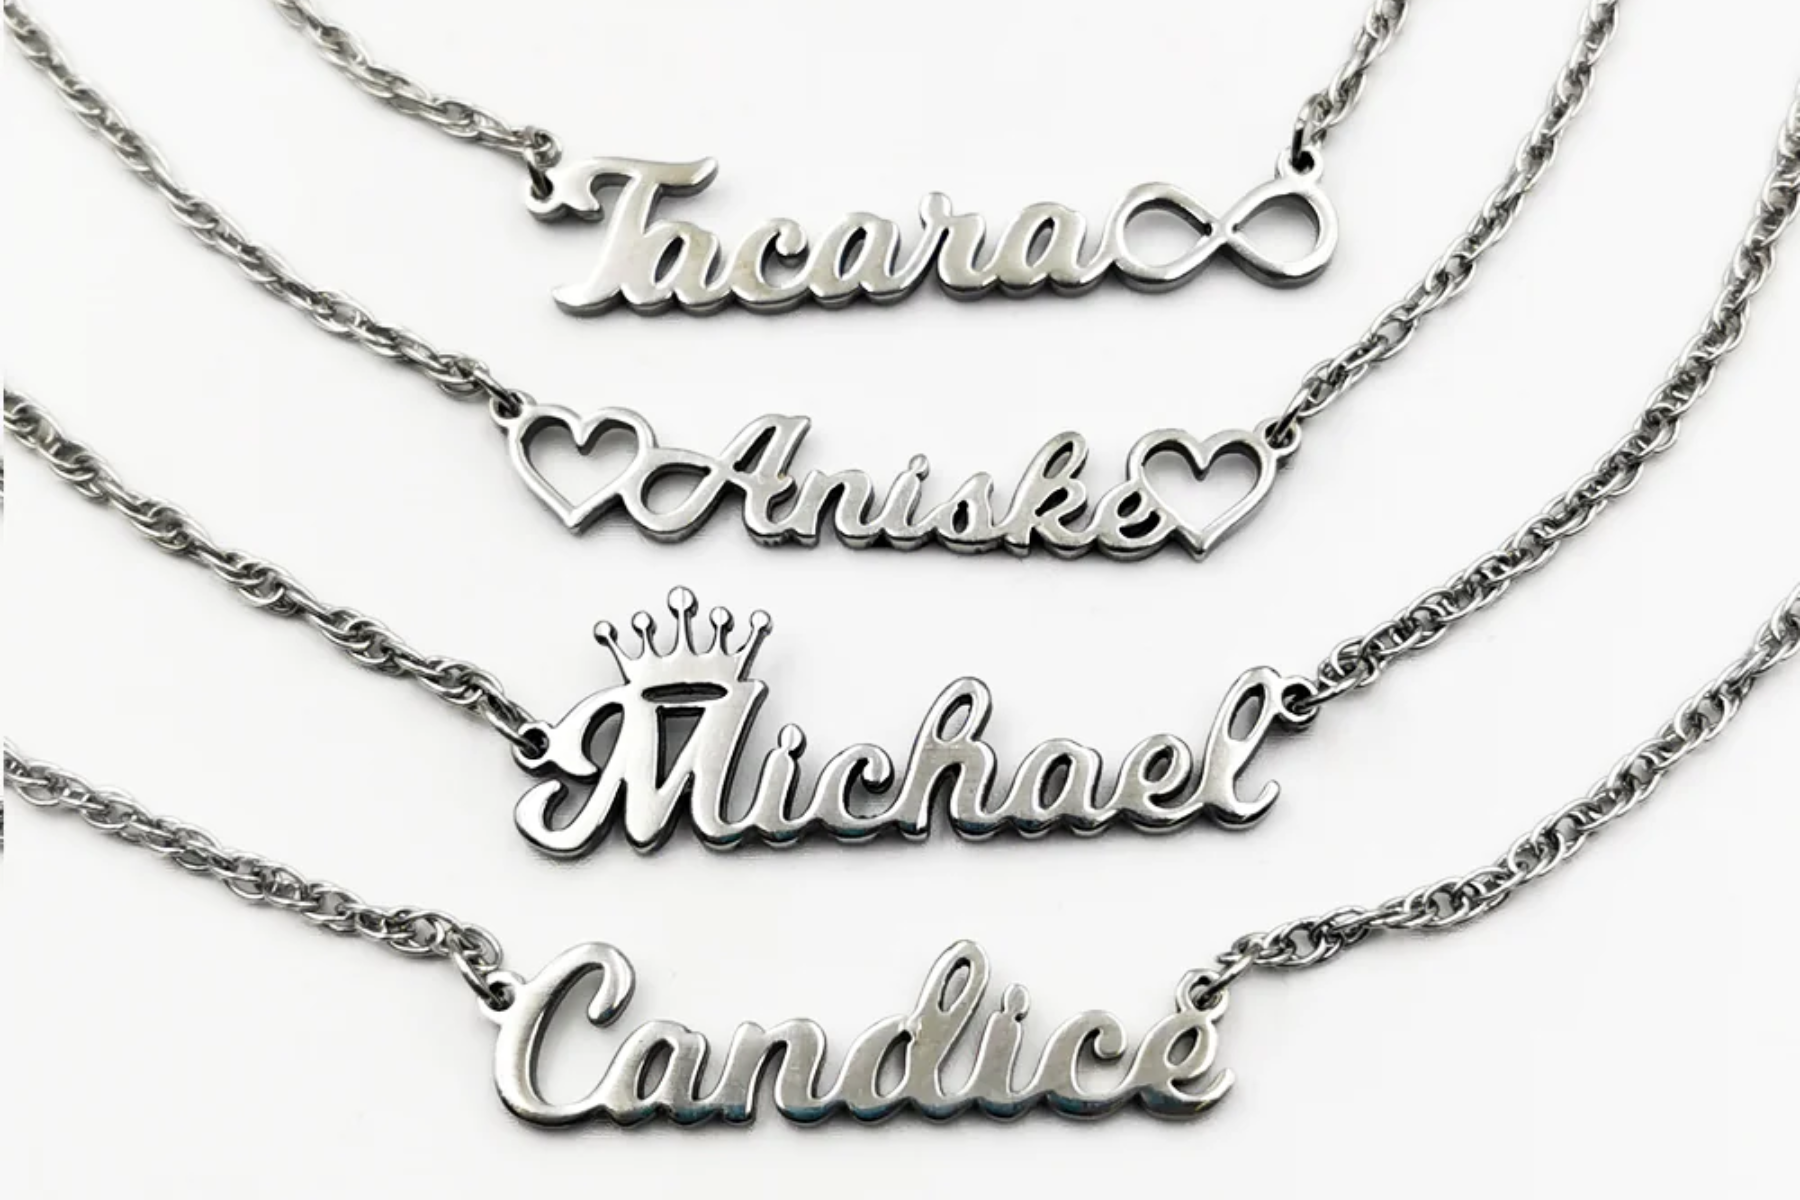 Four personalized necklaces bearing different names